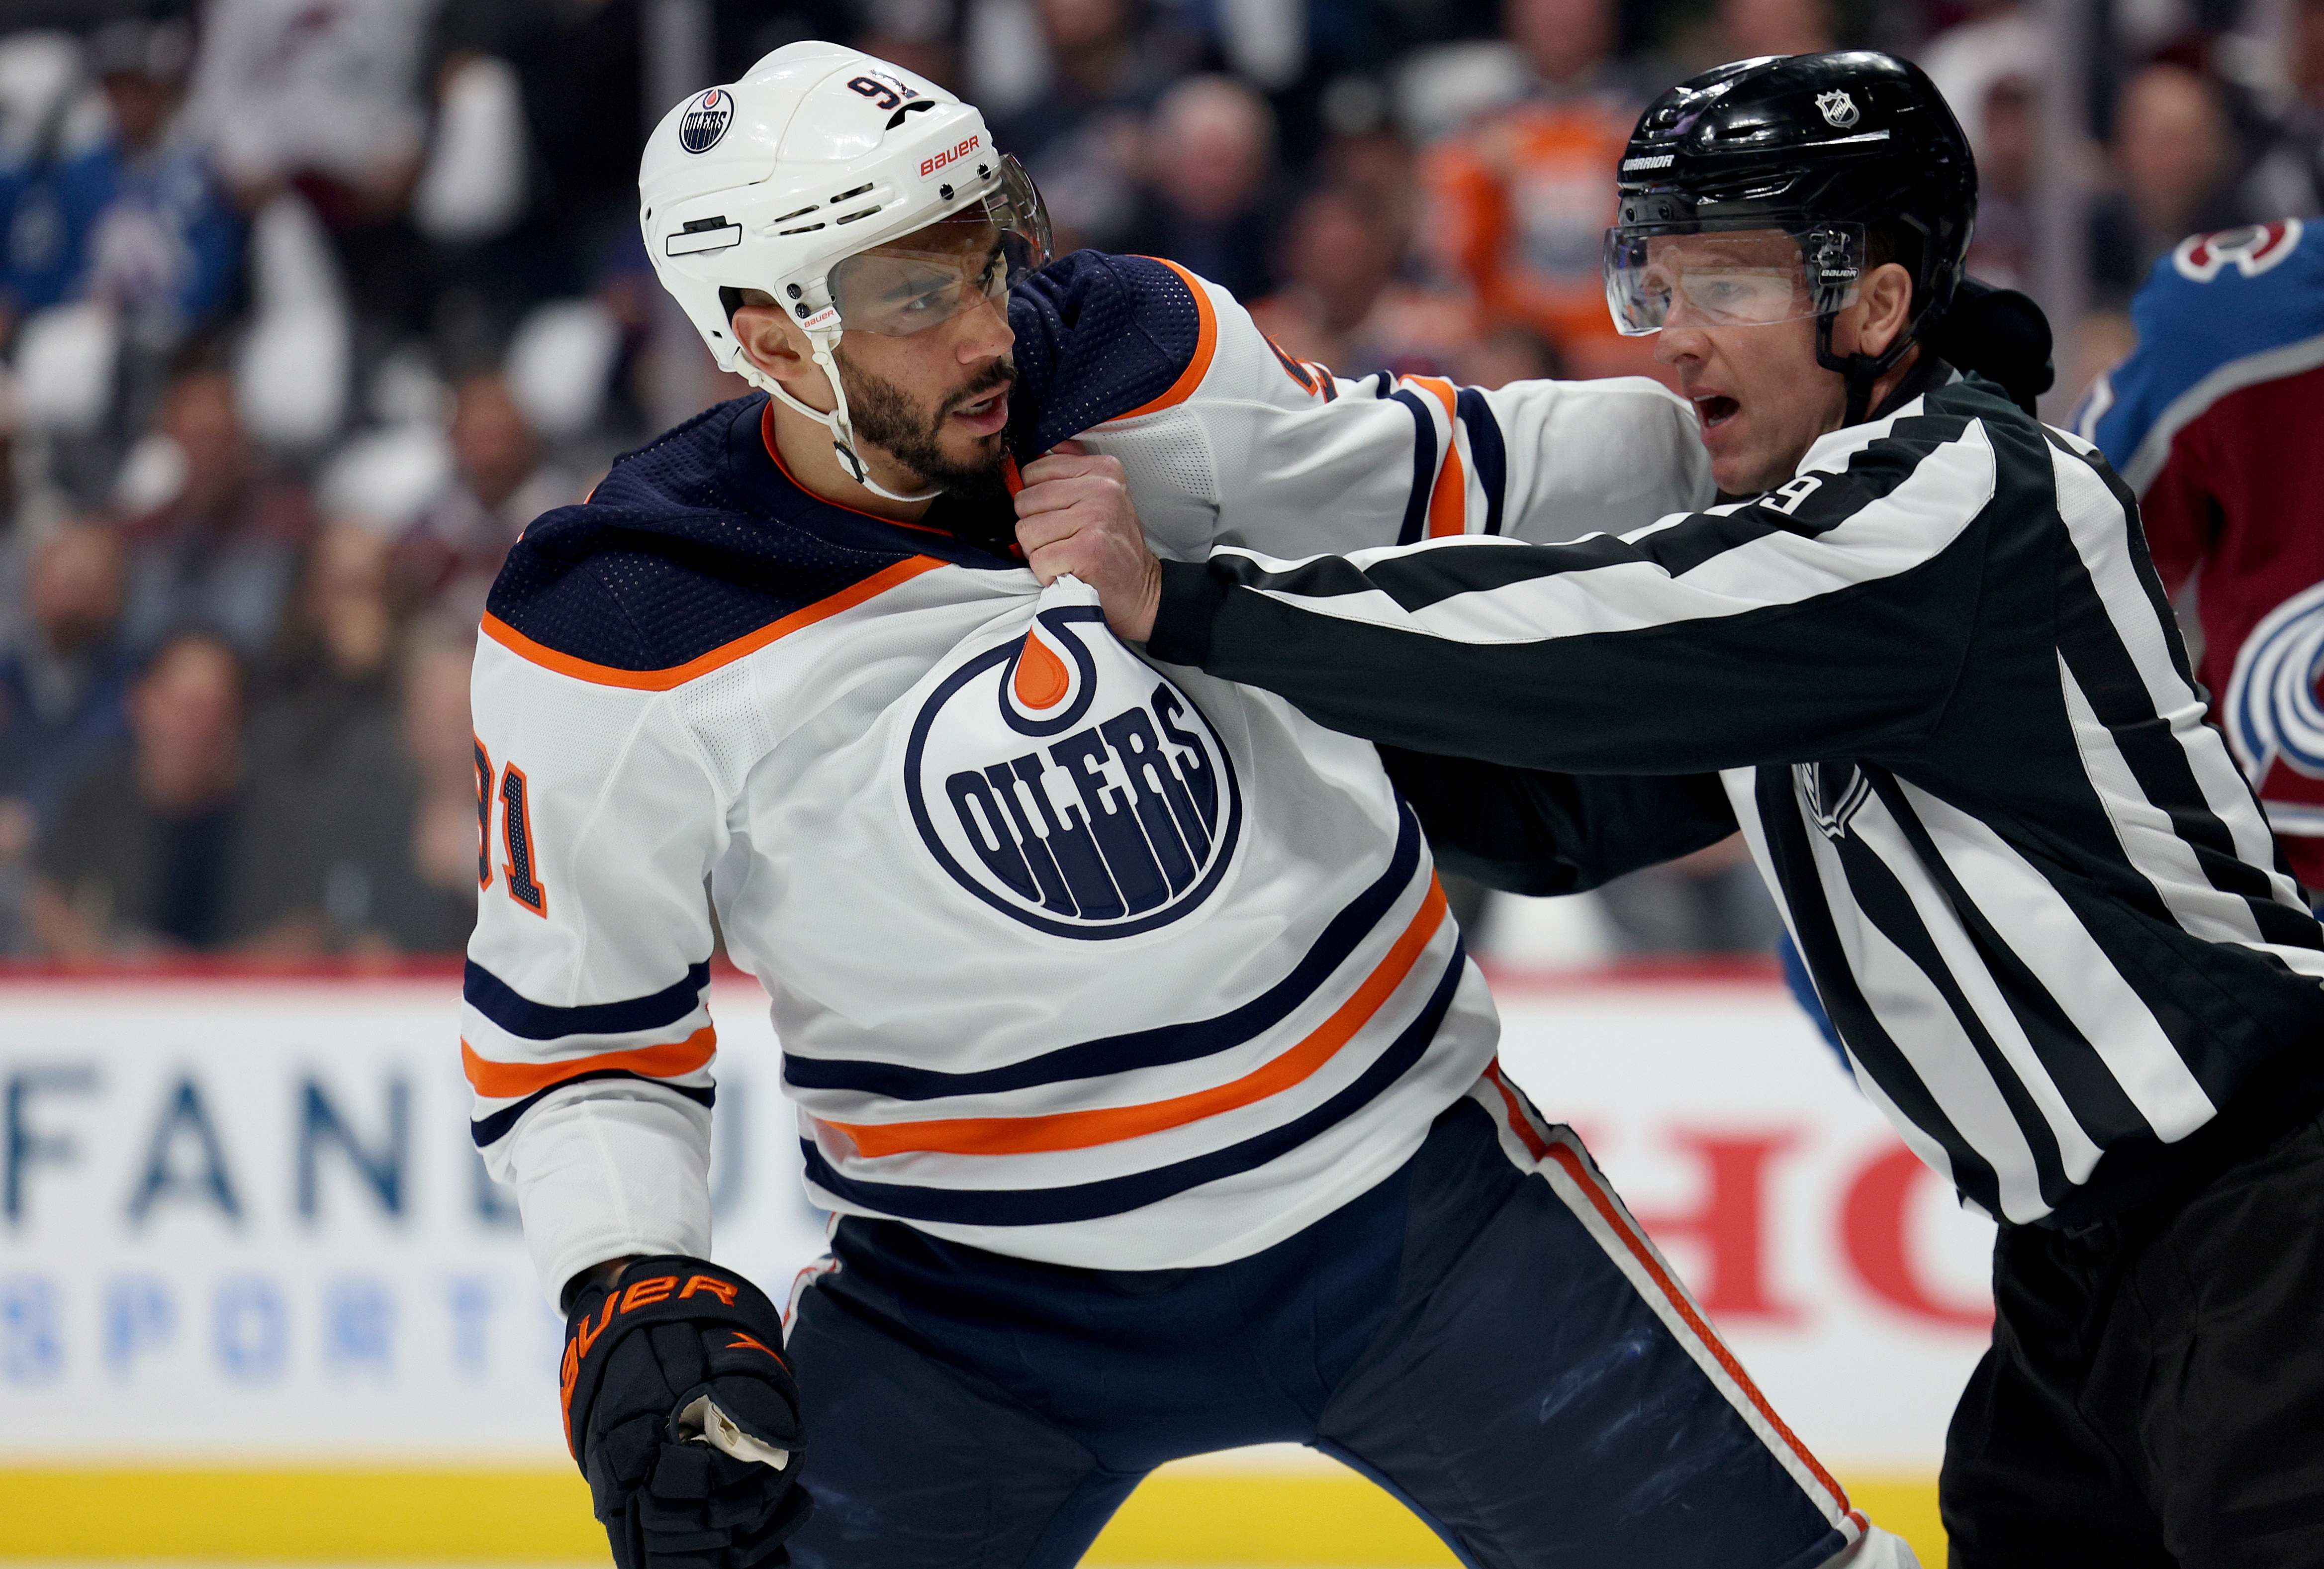 Evander Kane #91 of the Edmonton Oilers is held back by referee Dan O’Rourke #9 against the Colorado Avalanche during the first period Game Two of the Western Conference Final of the 2022 Stanley Cup Playoffs at Ball Arena on June 02, 2022 in Denver, Colorado.